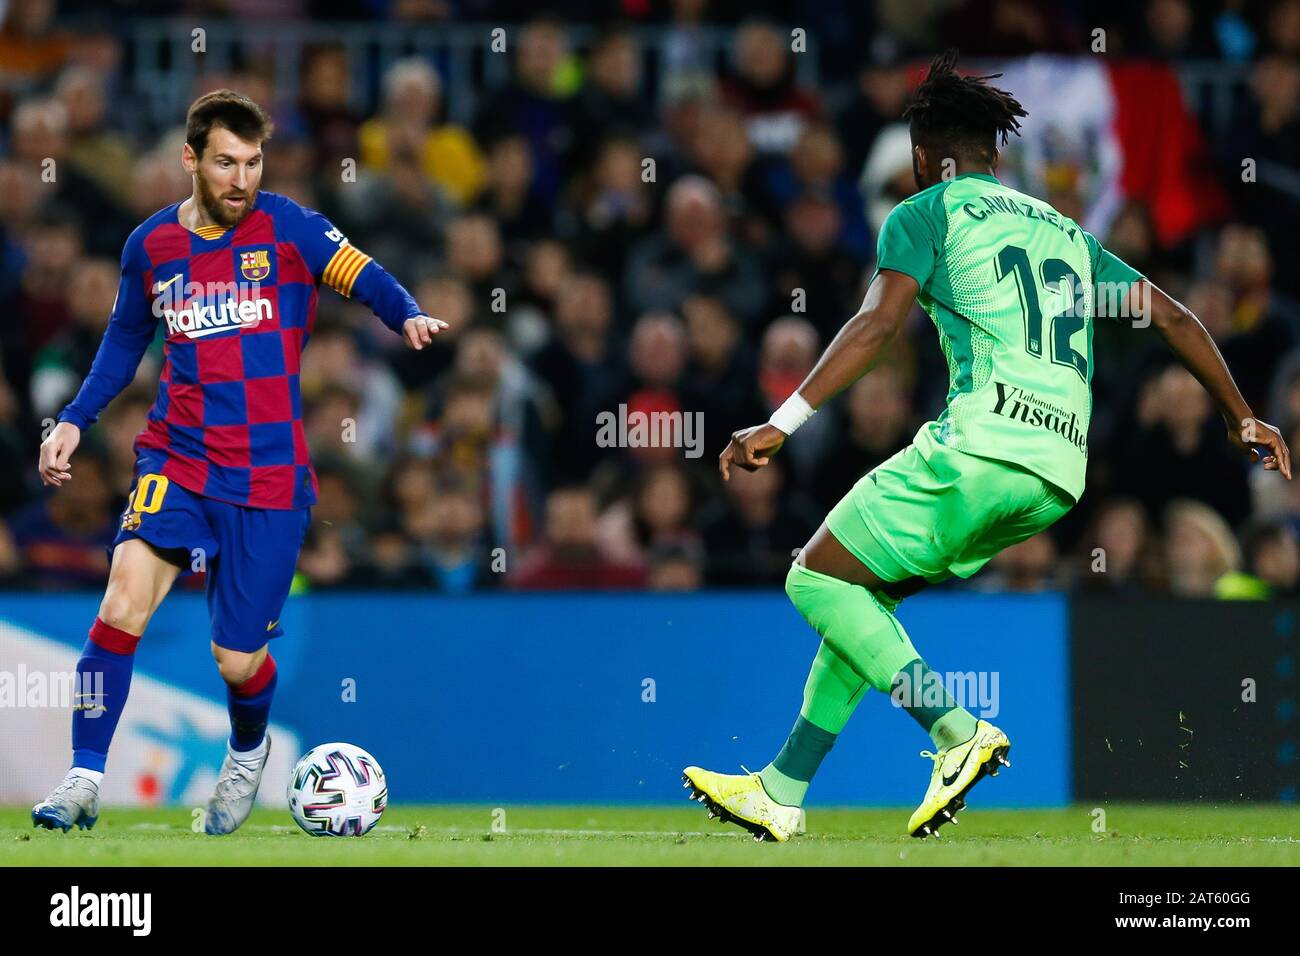 Barcelona, Catalonia, Spain. 30th Jan, 2020. January 30, 2020 - Camp Nou, Barcelona, Spain - Copa del Rey - FC Barcelona v Leganes: Lionel Messi of FC Barcelona dribbles Chidozie Awaziem of CD Leganes. Credit: Eric Alonso/ZUMA Wire/Alamy Live News Stock Photo